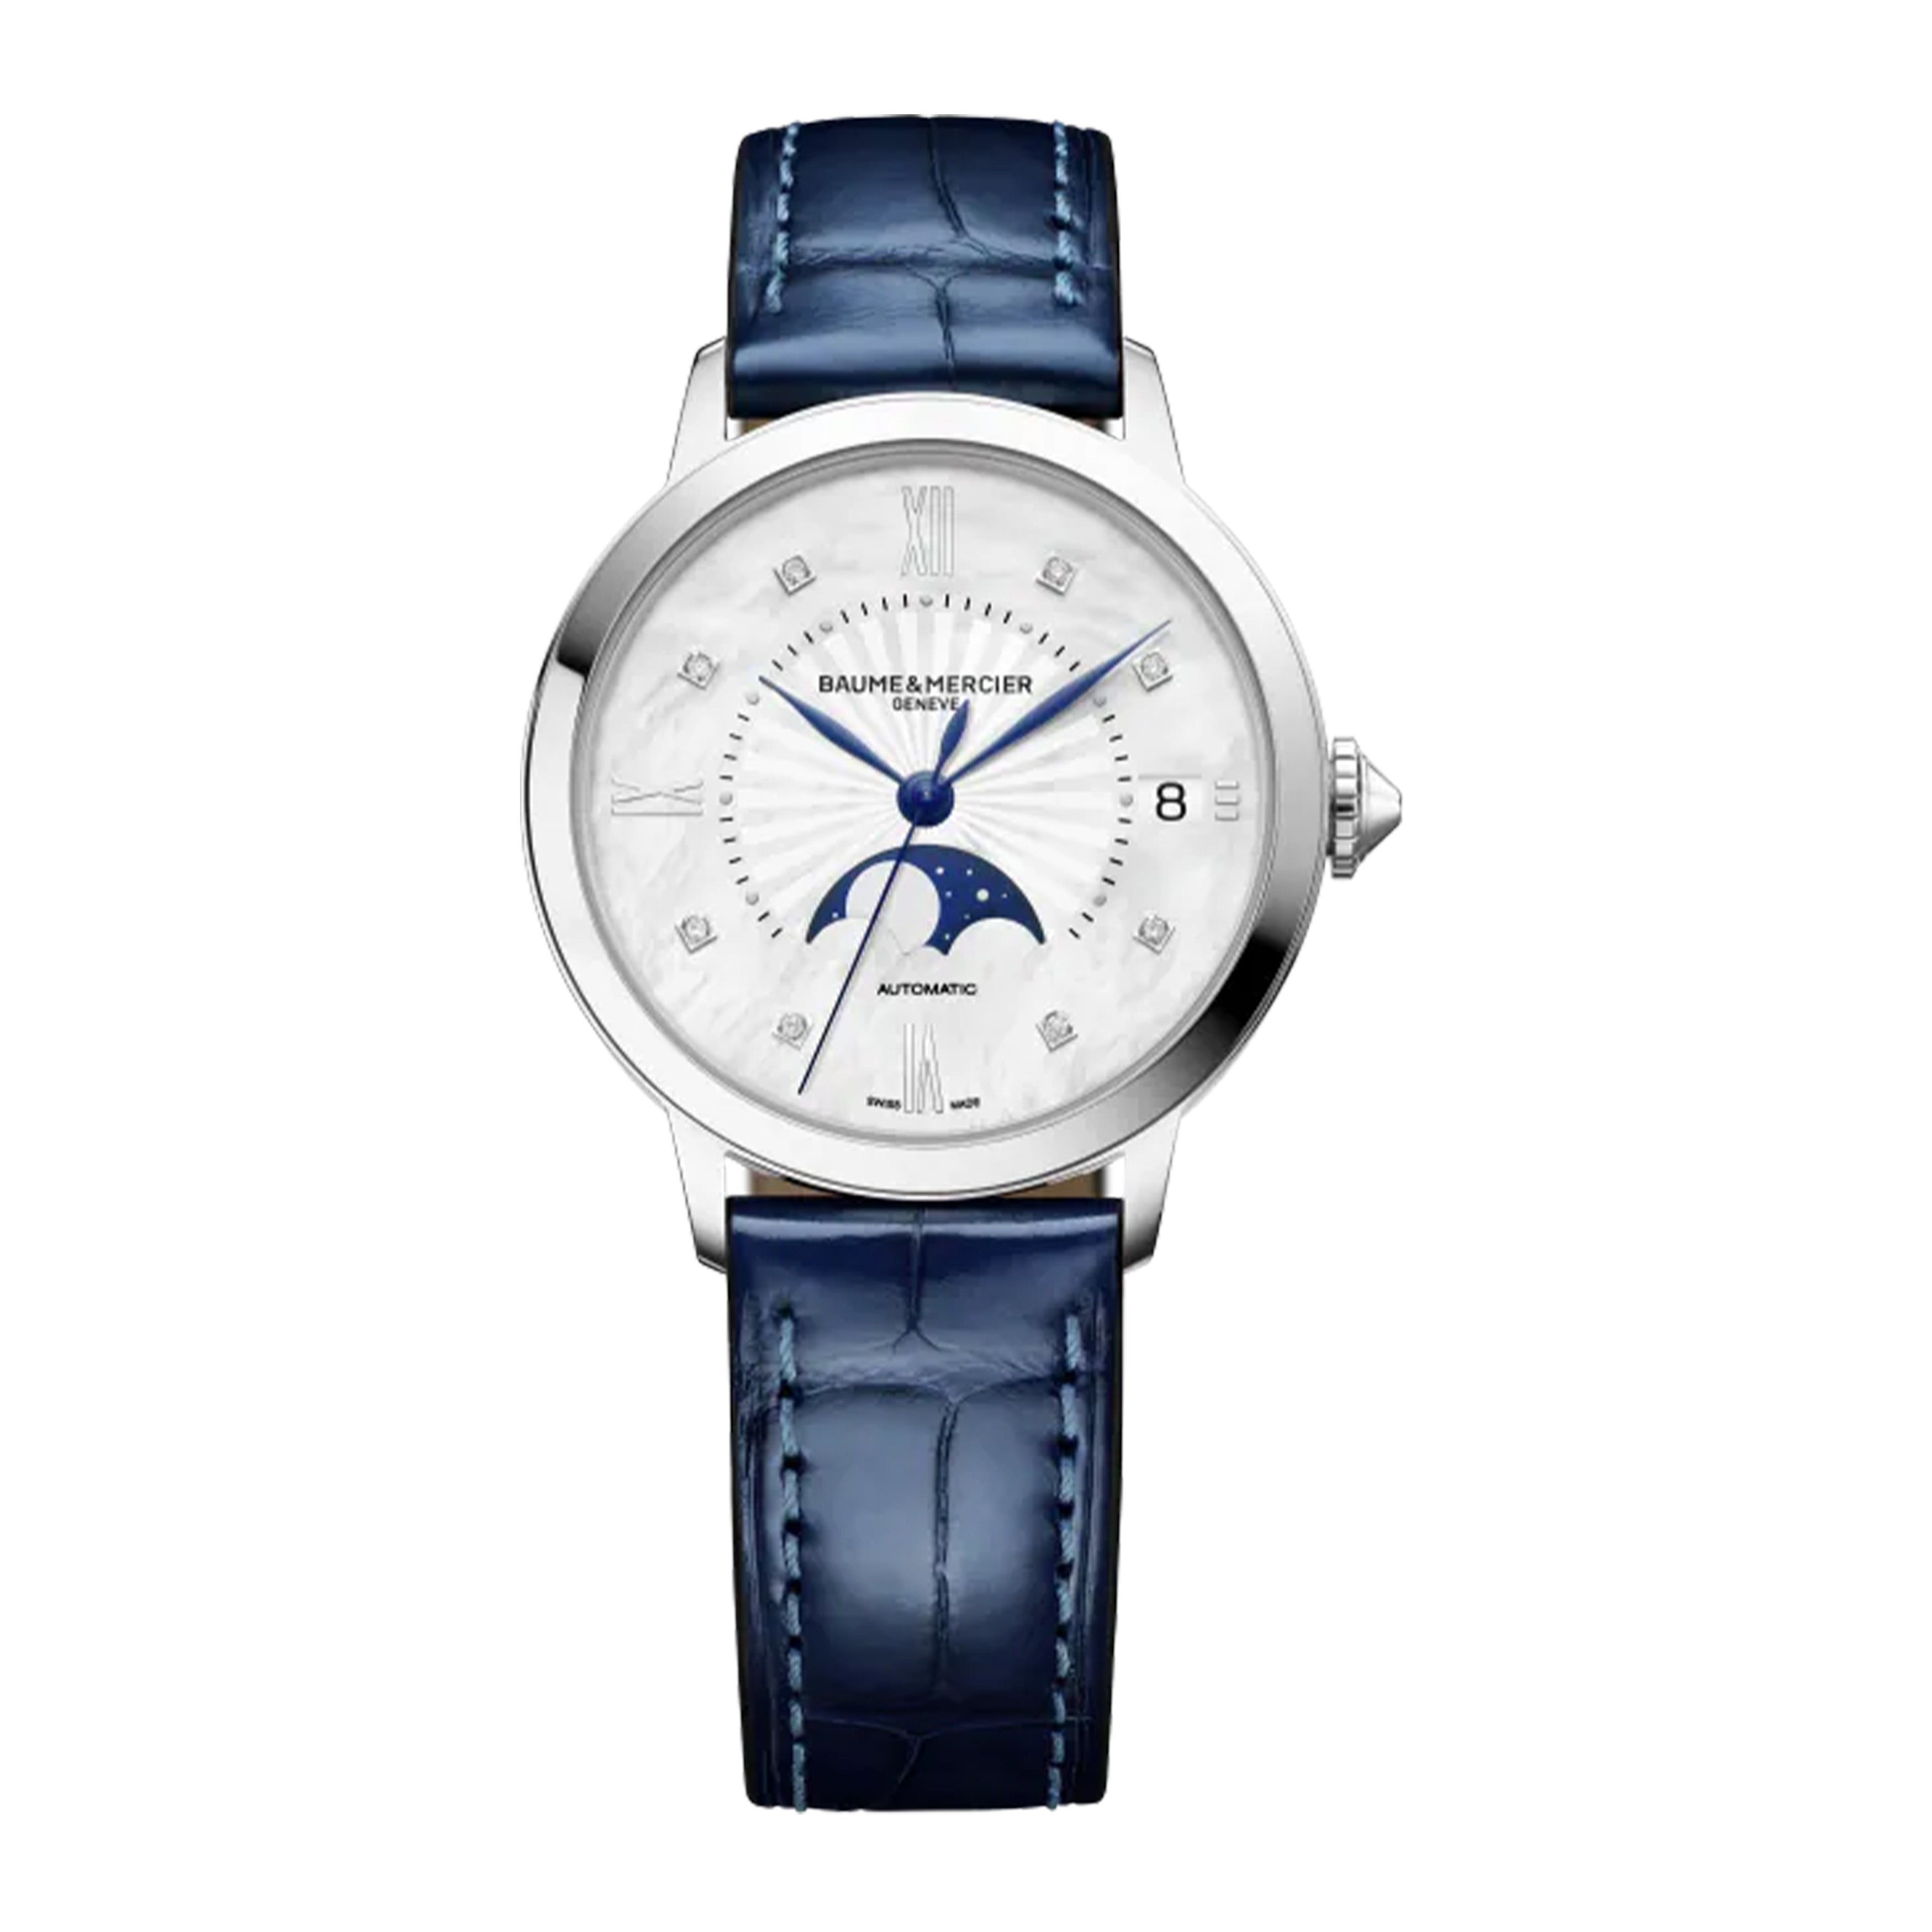 BAUME & MERCIER Classima Moon Phase Watch, 34MM MOTHER OF PEARL DIAL, 10633